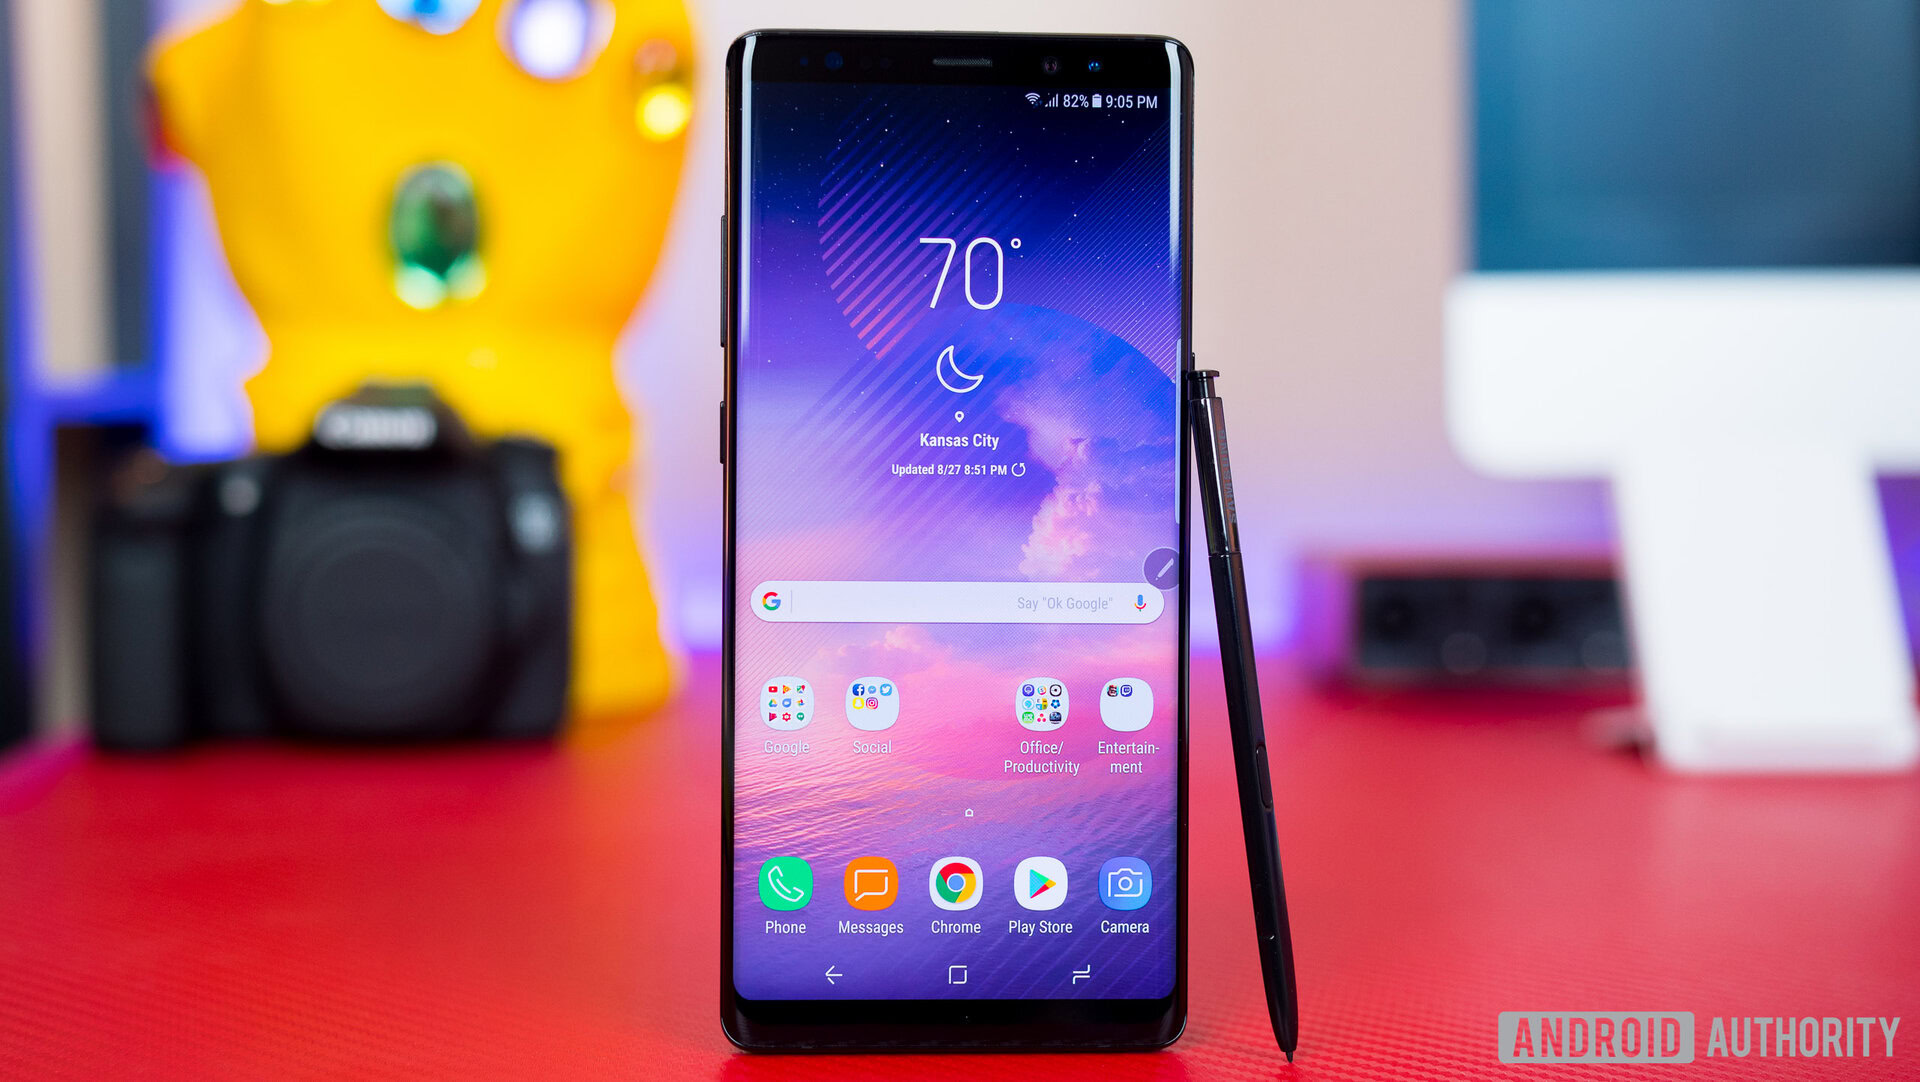 Wennen aan Kwik Jood Samsung Galaxy Note 8 review: Do Bigger Things, at a Bigger Price